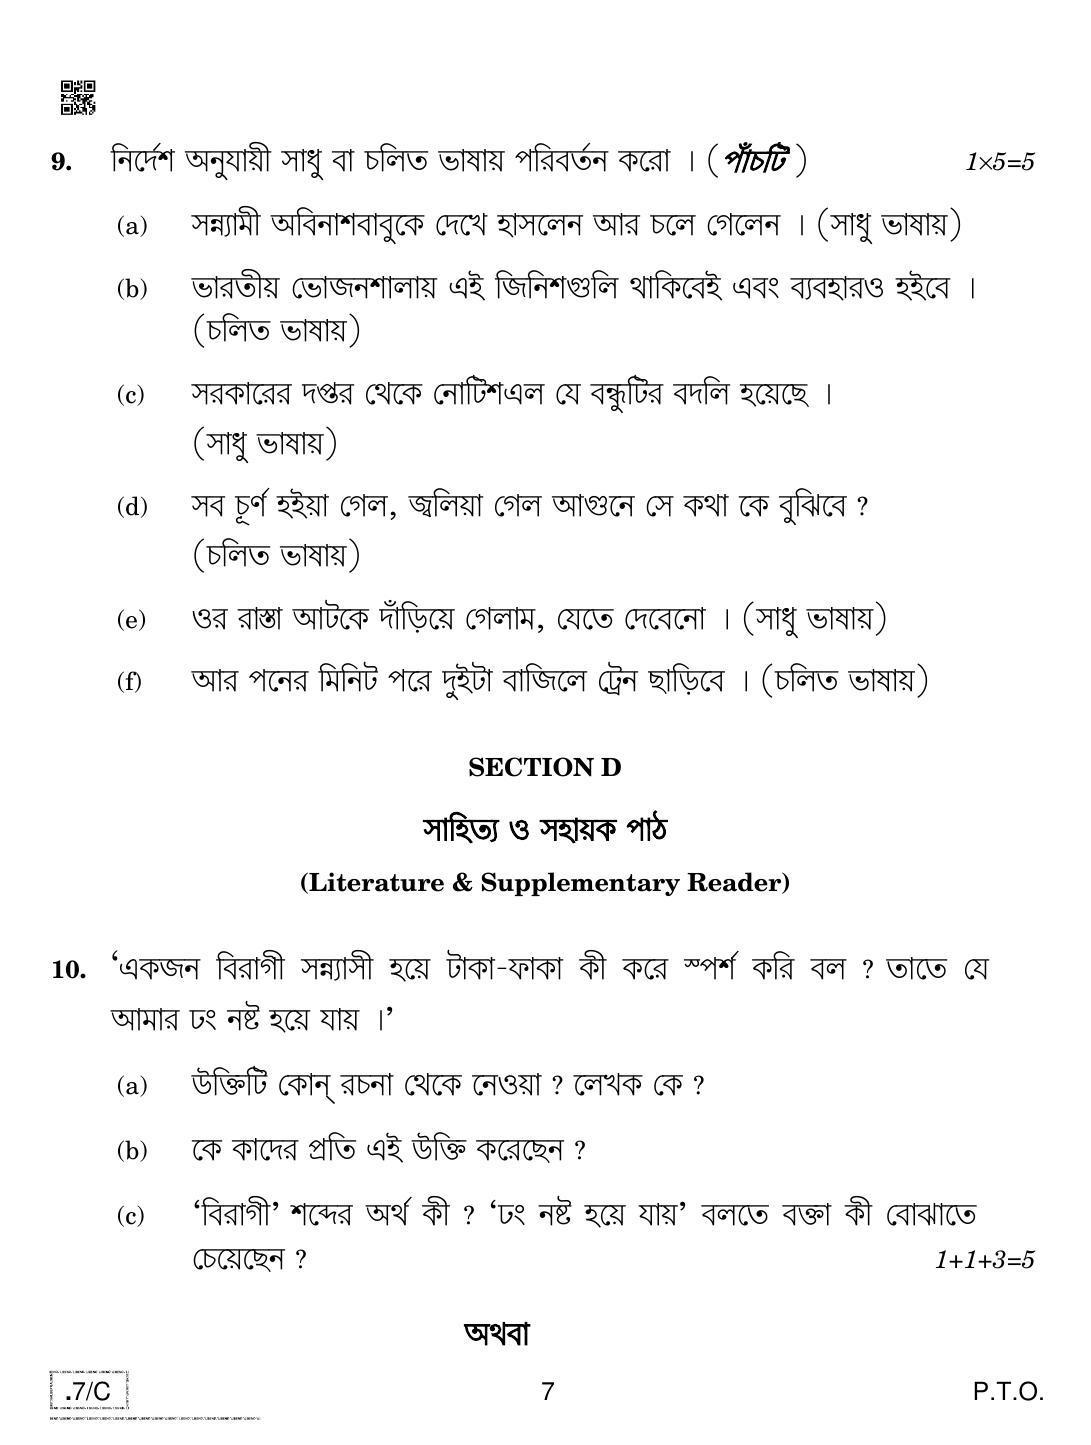 CBSE Class 10 Bengali 2020 Compartment Question Paper - Page 7